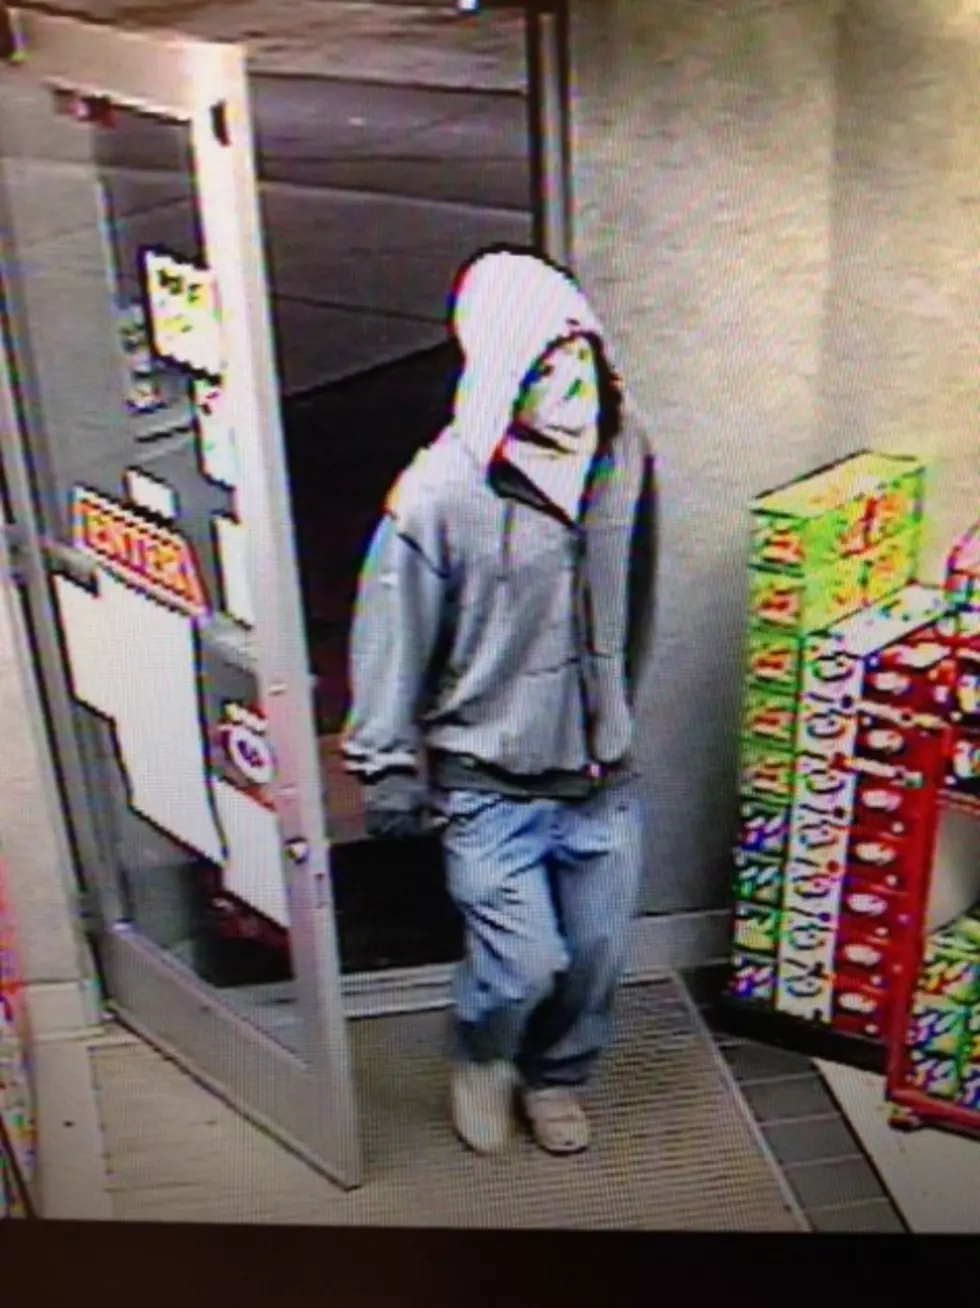 Cloquet Police Search For Robbery Suspect;  You Can Help By Identifying Suspect From Surveillance Photos